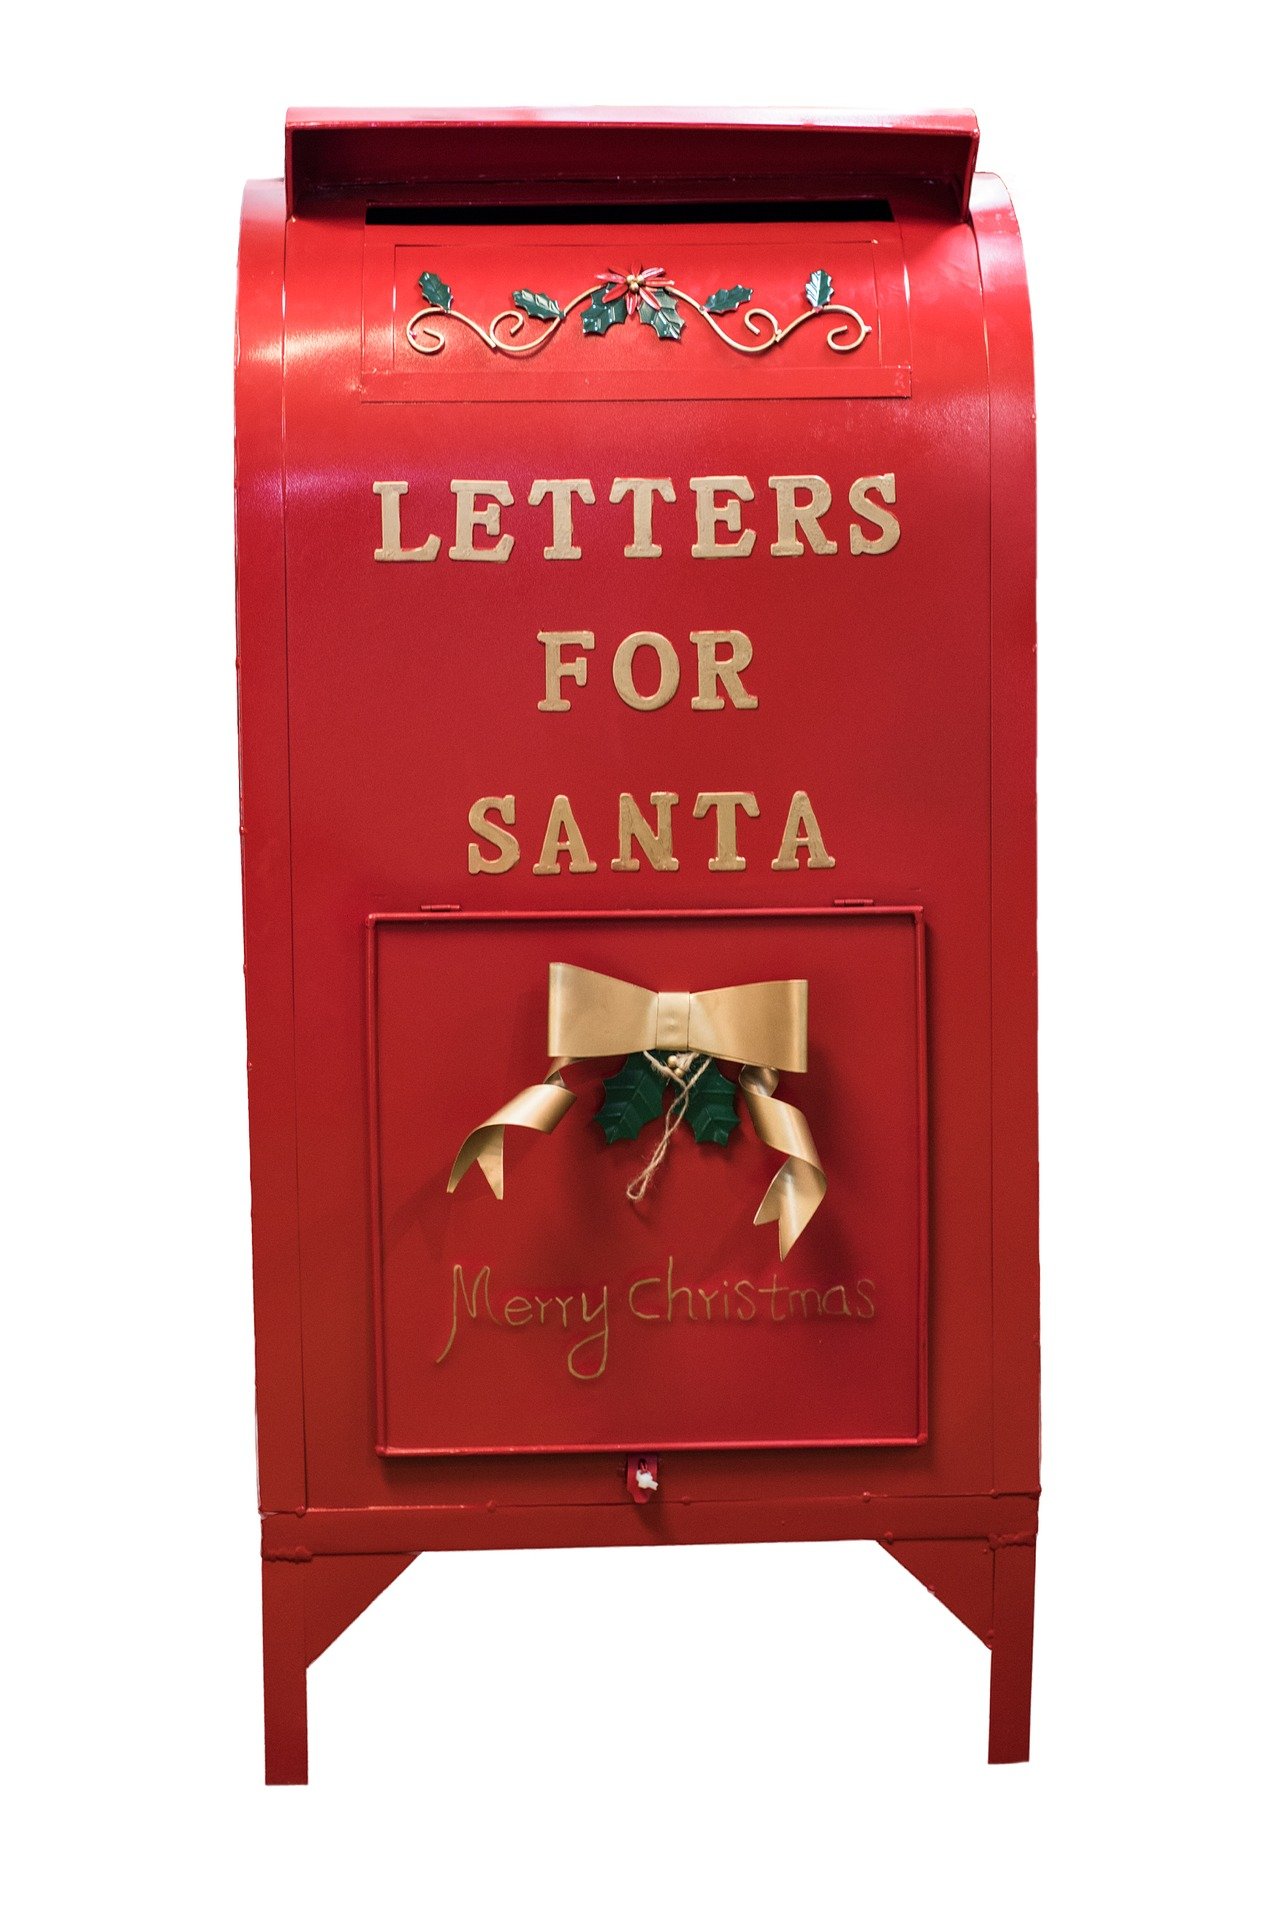 A post box that deliver mail to Santa Clause in the North Pole. | Source: Pixabay.